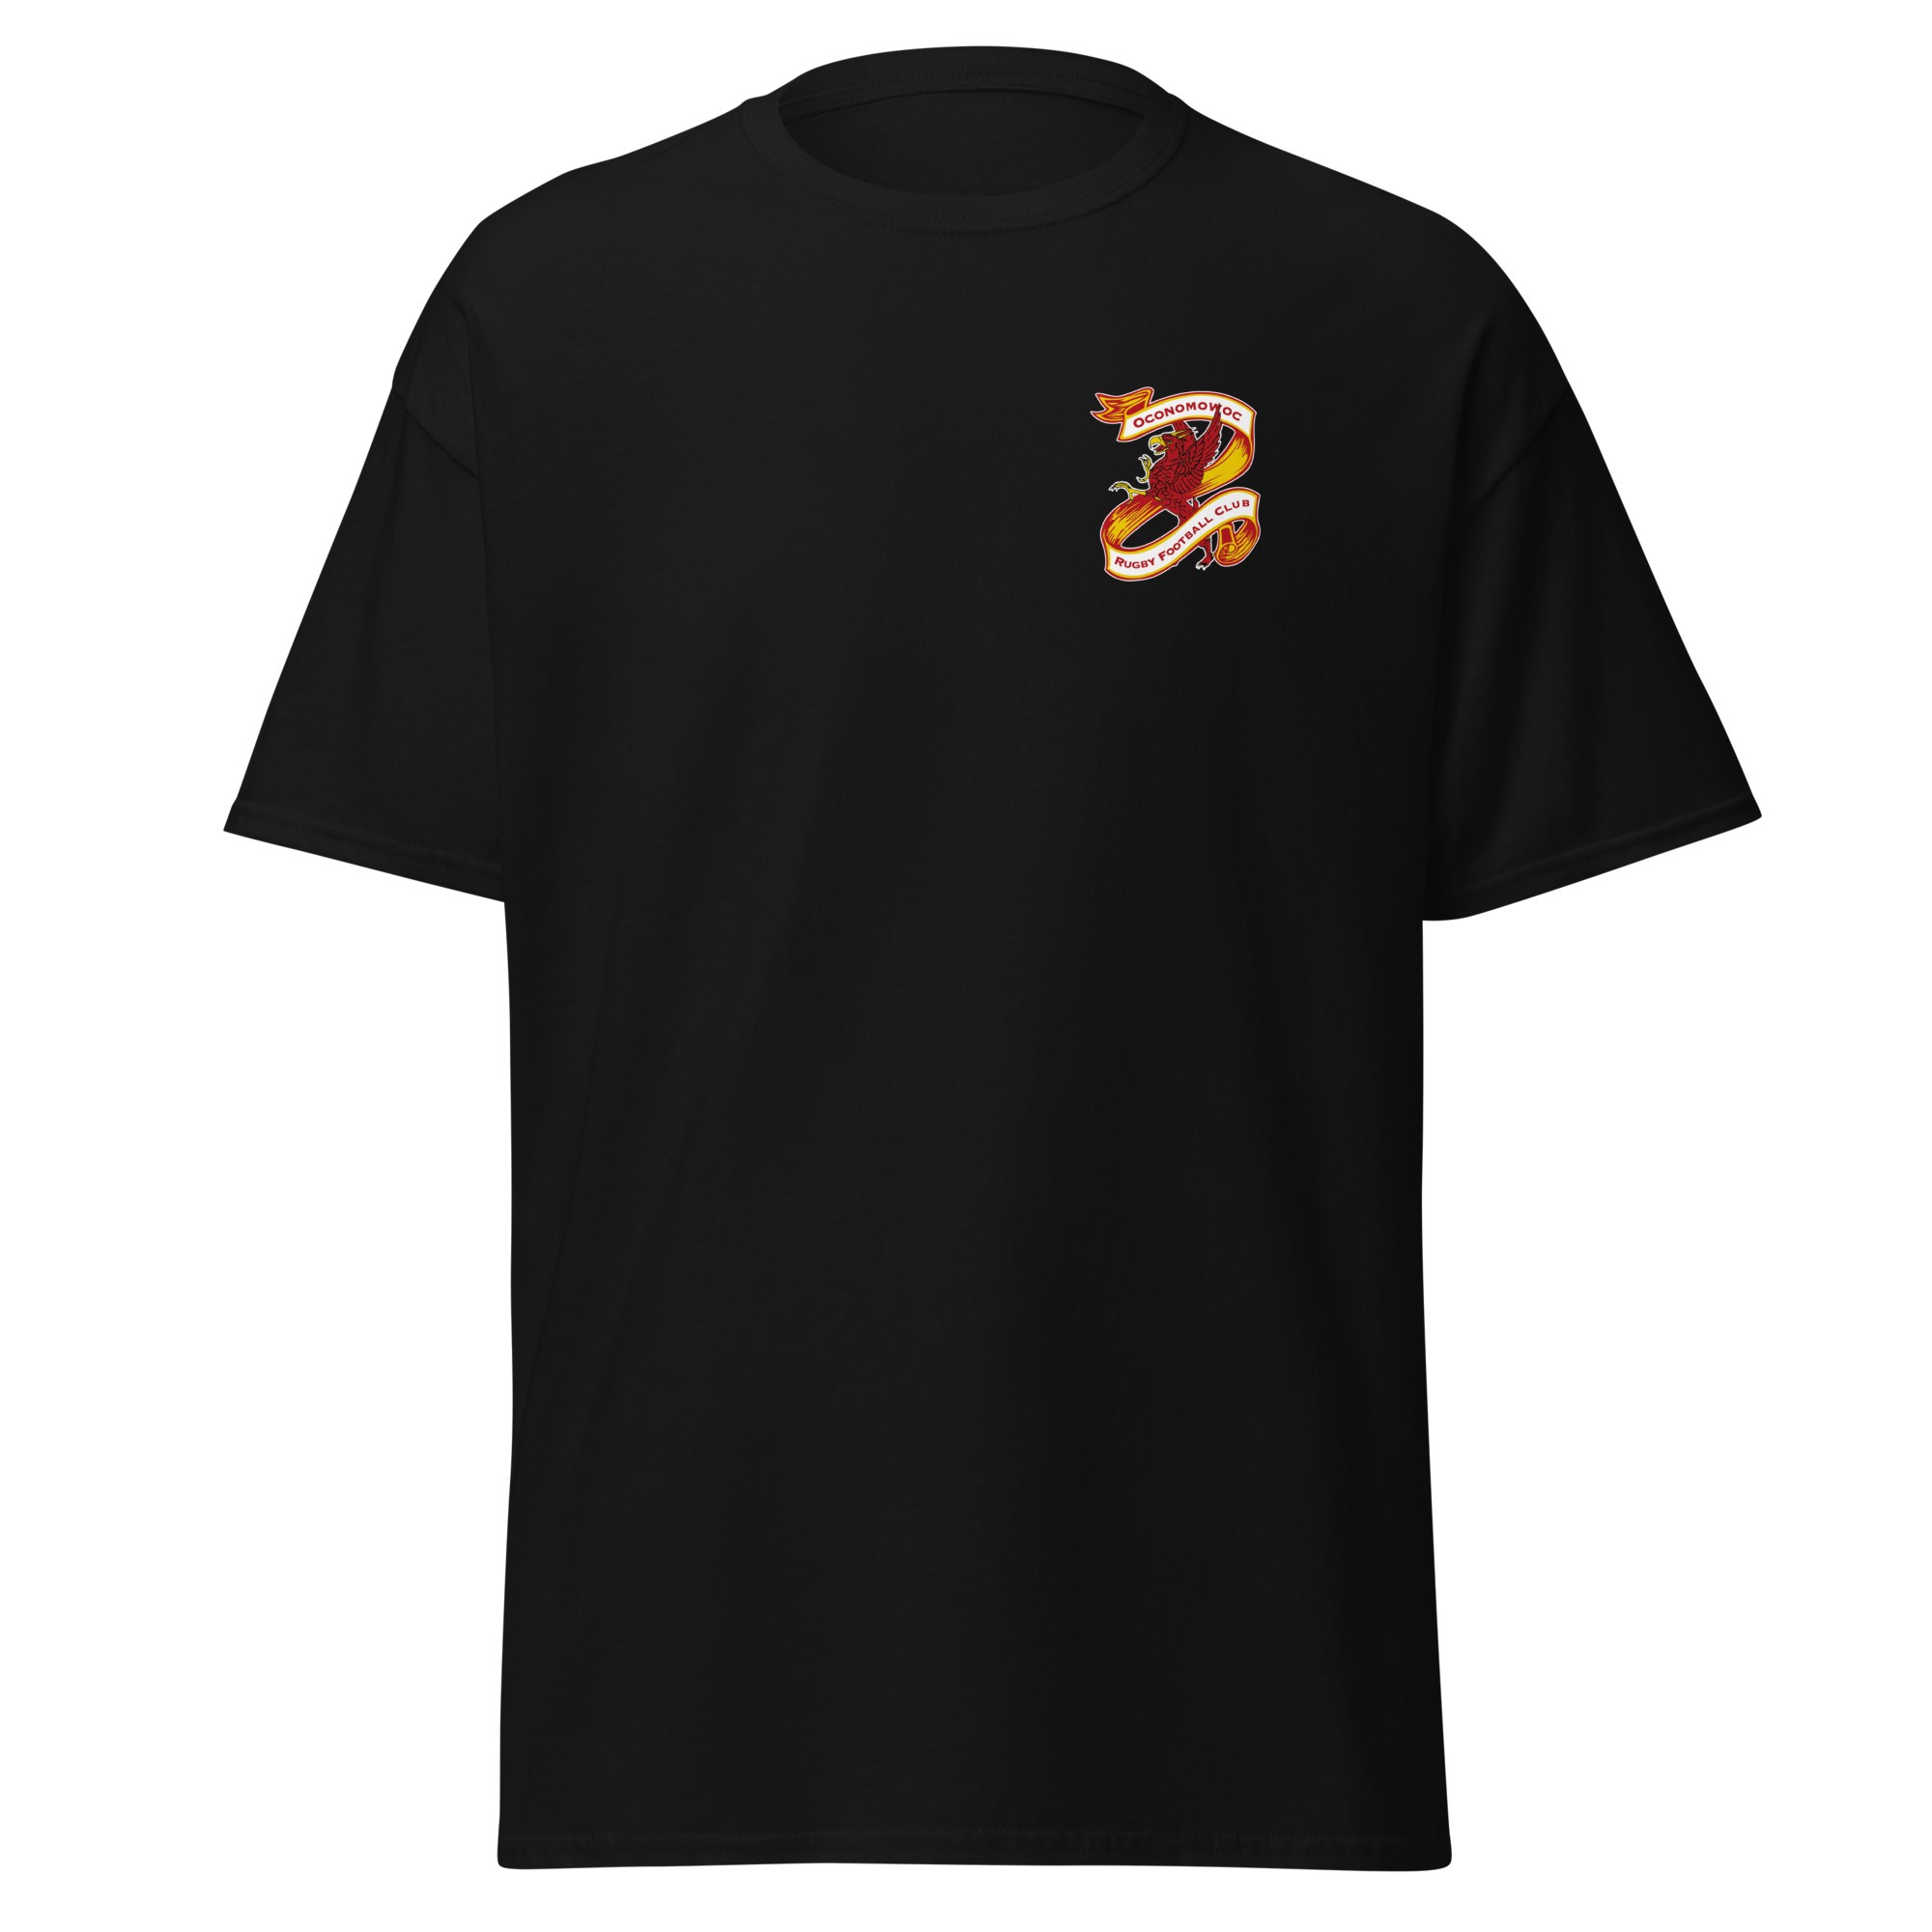 Mens Classic Tee Black Front 64f51a1ee5358.jpg